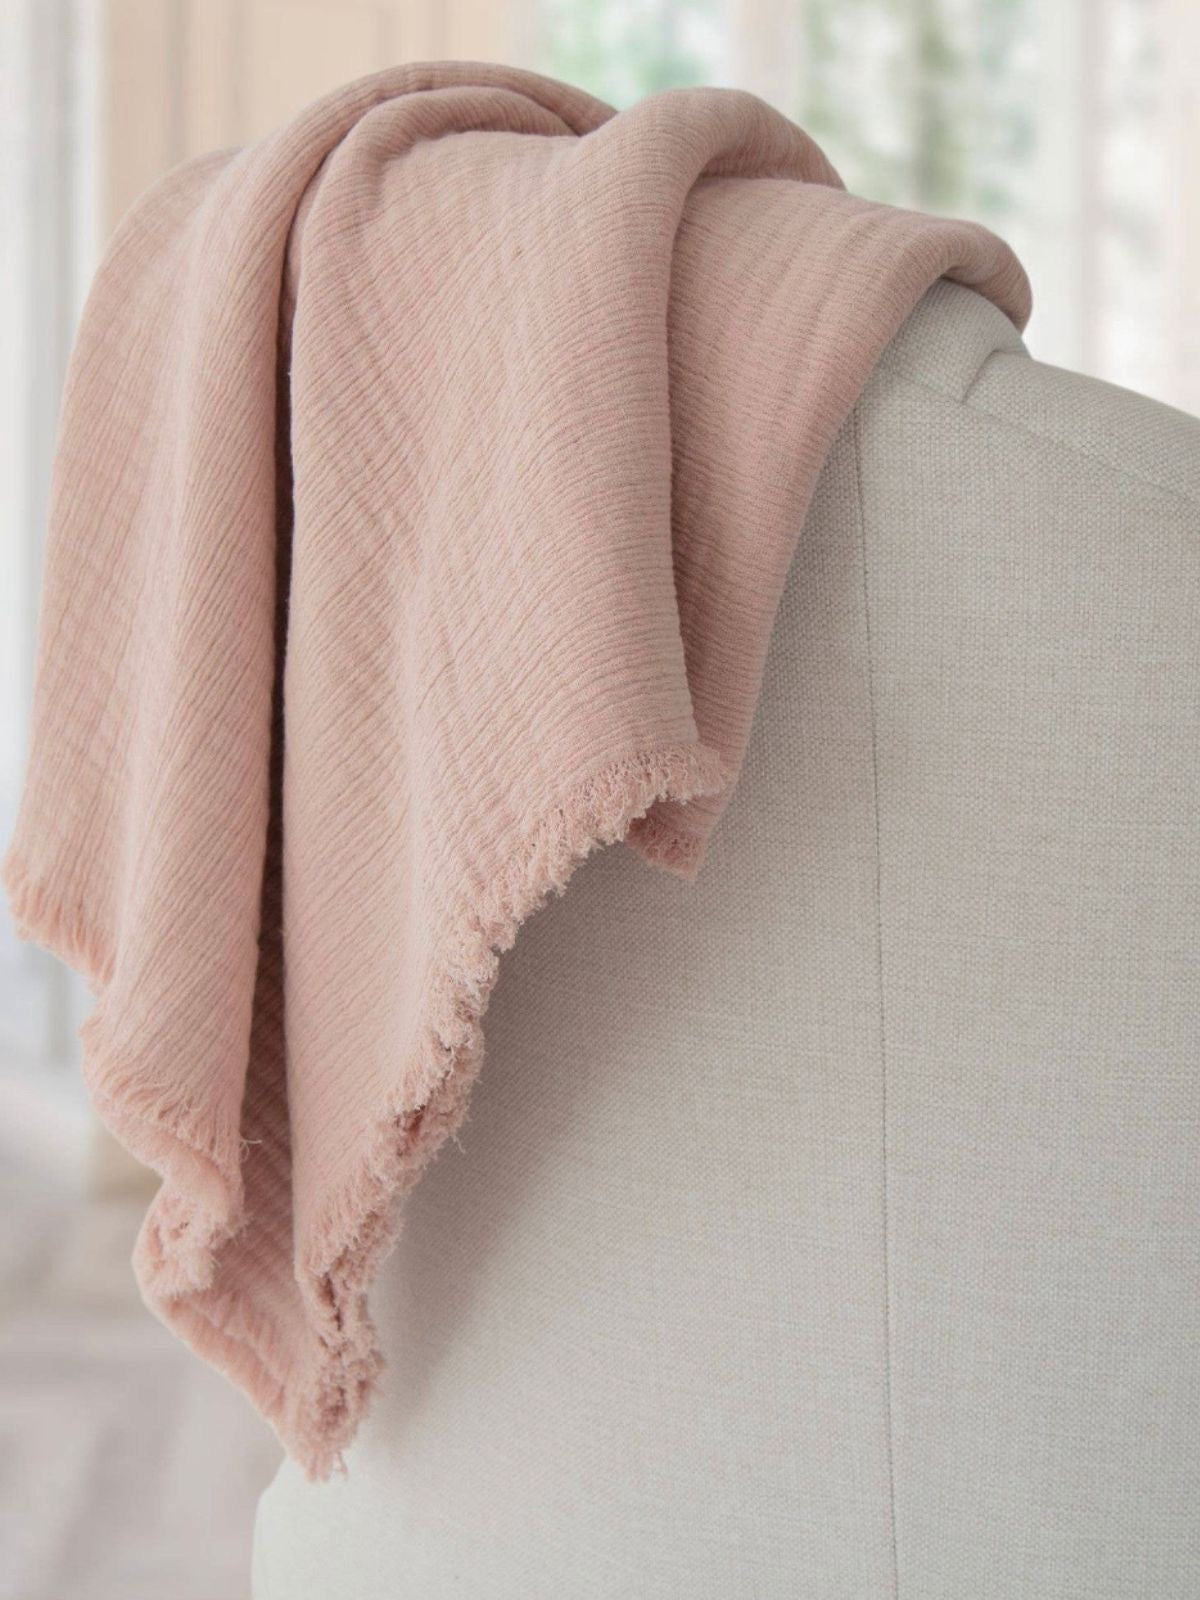 100% Cloud Gauze Cotton Throw Blanket with Frayed Edge in Blush color Sold by KYA Home Decor.